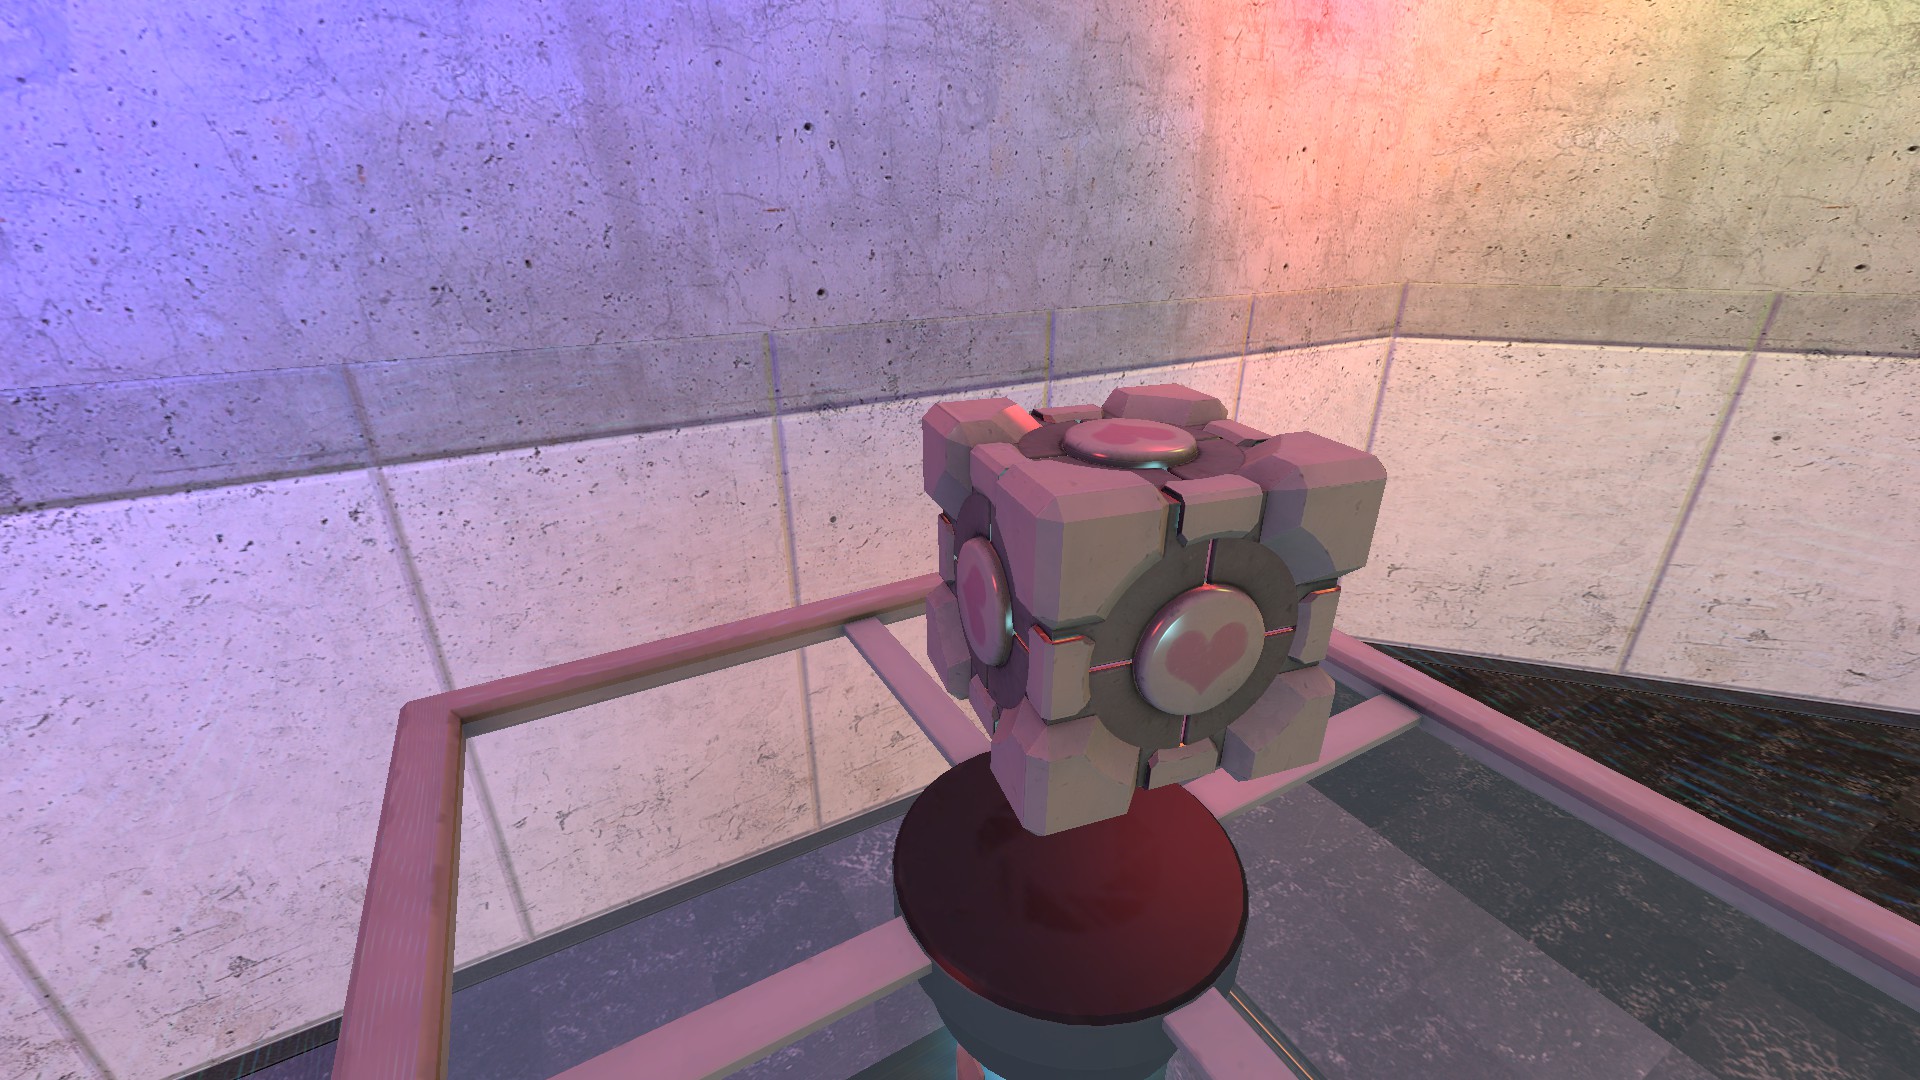 The companion cube sits on the exit platform as it rises.